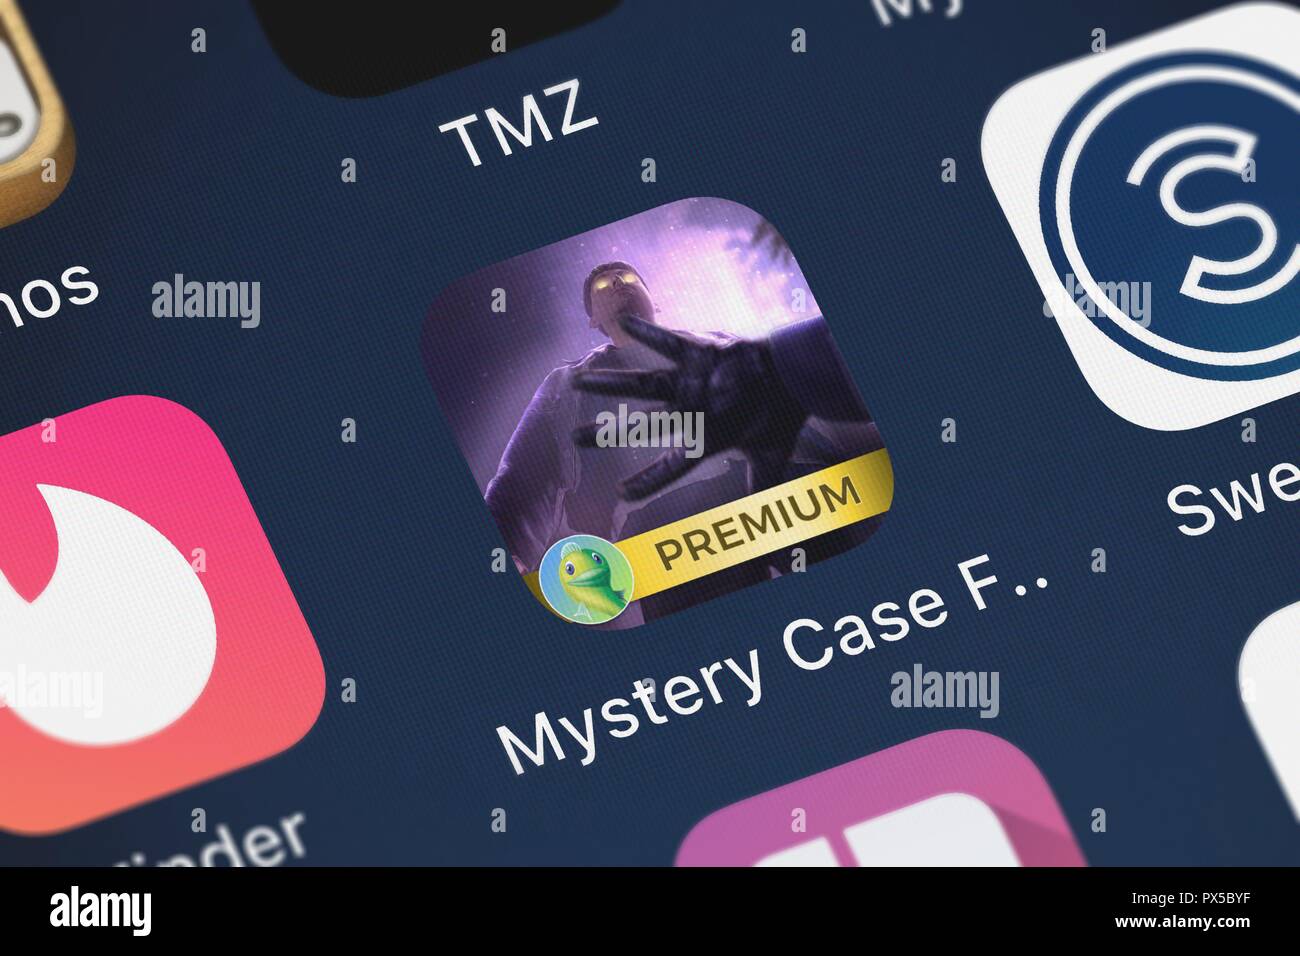 London, United Kingdom - October 19, 2018: The Mystery Case Files: Revenant mobile app from Big Fish Premium, LLC on an iPhone screen. Stock Photo